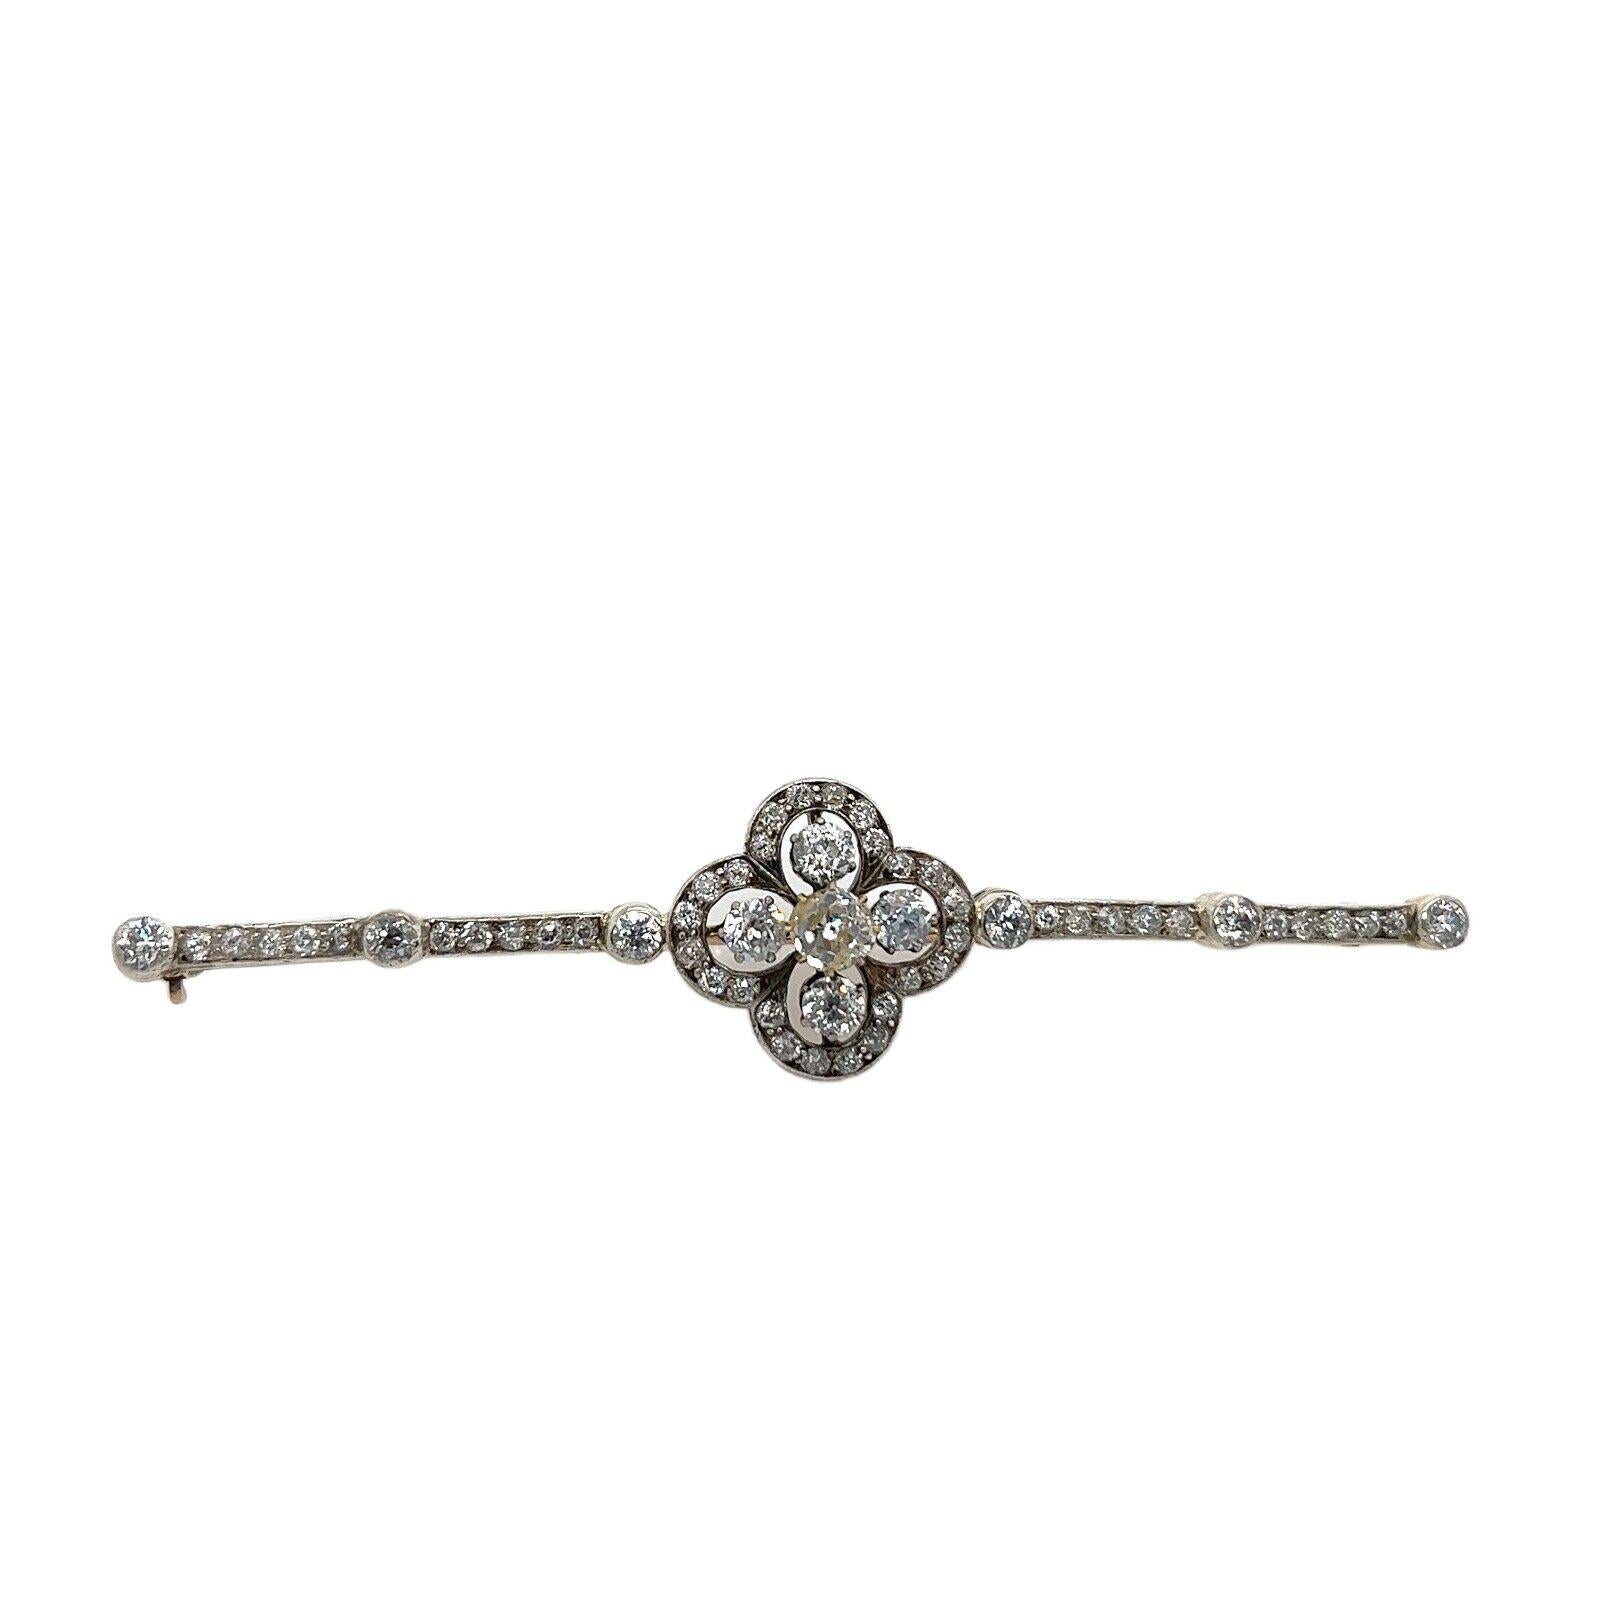 This stunning antique brooch  features 2.0ct of round old cut Diamonds,  set in 9ct Yellow Gold, Platinum, Palladium & Silver. This is a perfect gift for any occasion.  

Additional Information:
Total Gold Weight: 7.7g
Total Diamond Weight: